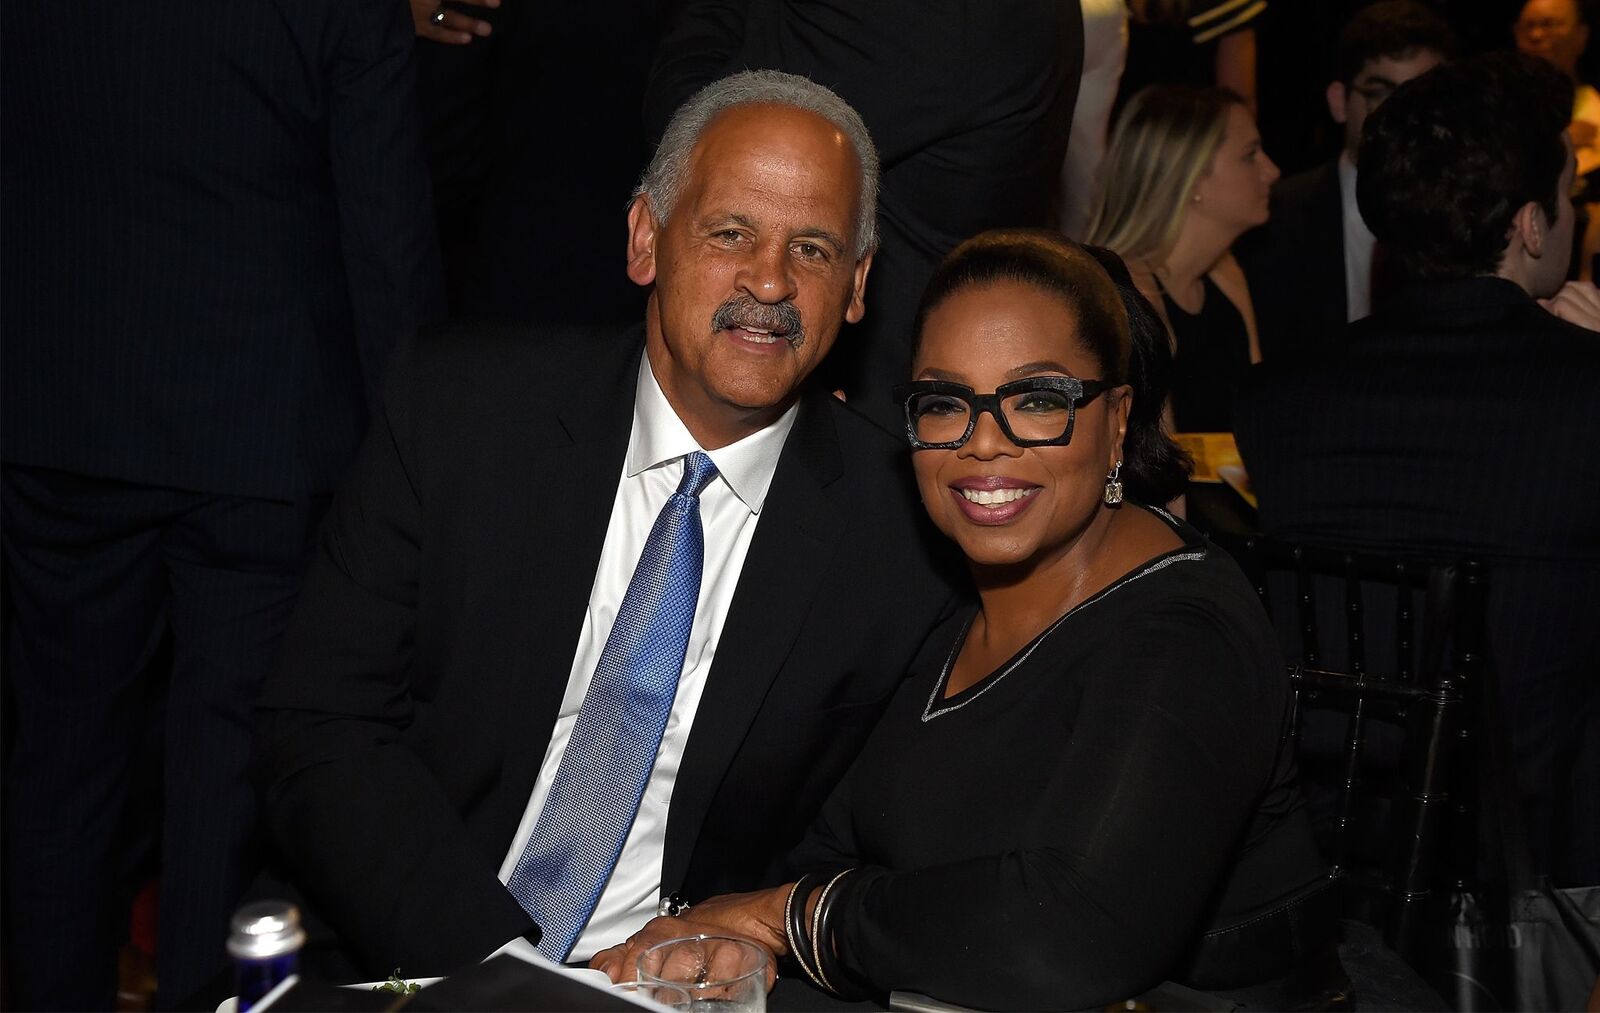 Stedman Graham and Oprah Winfrey at The Robin Hood Foundation's benefit on May 14, 2018, in New York City | Photo: Kevin Mazur/Getty Images